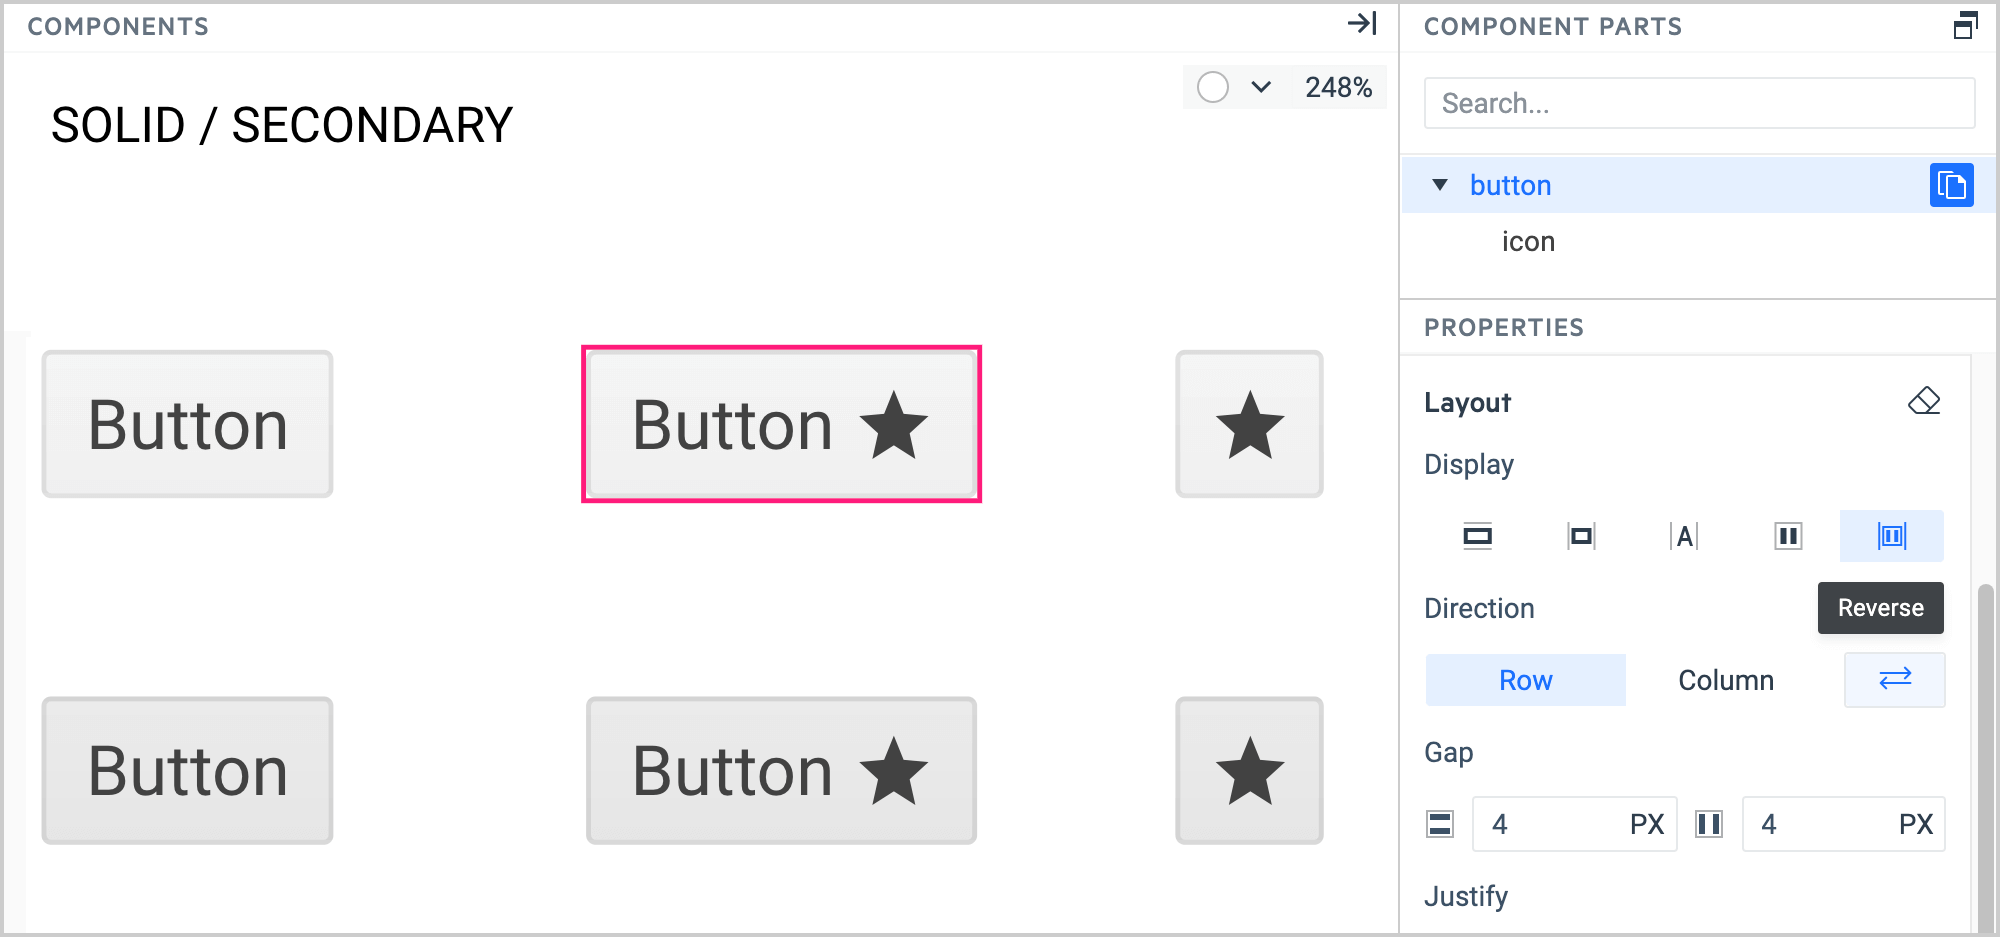 Swapping the positions of the Button text and icon